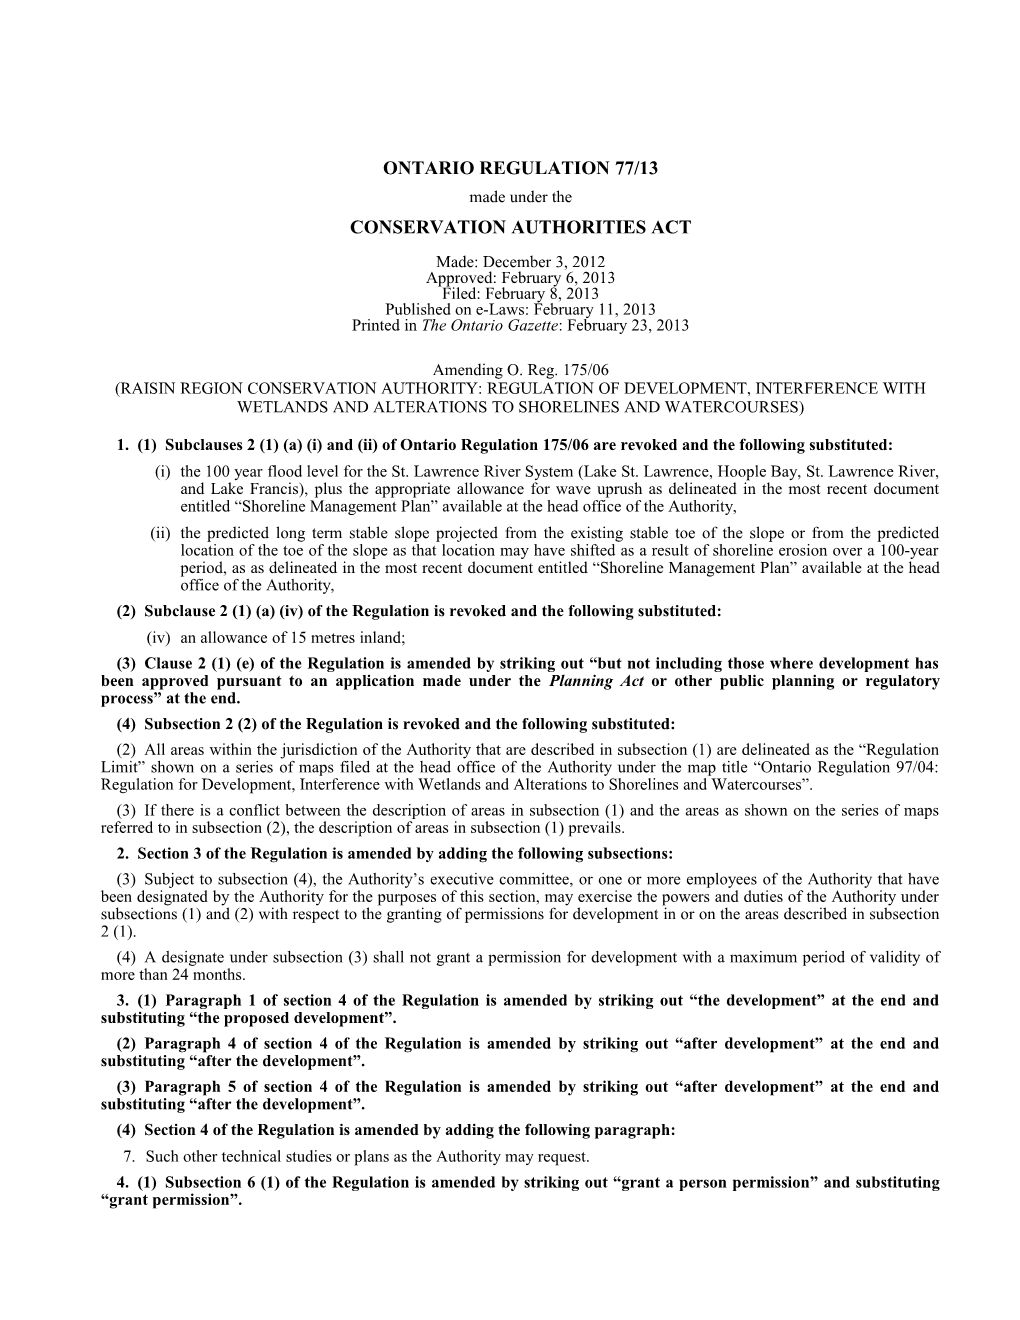 CONSERVATION AUTHORITIES ACT - O. Reg. 77/13